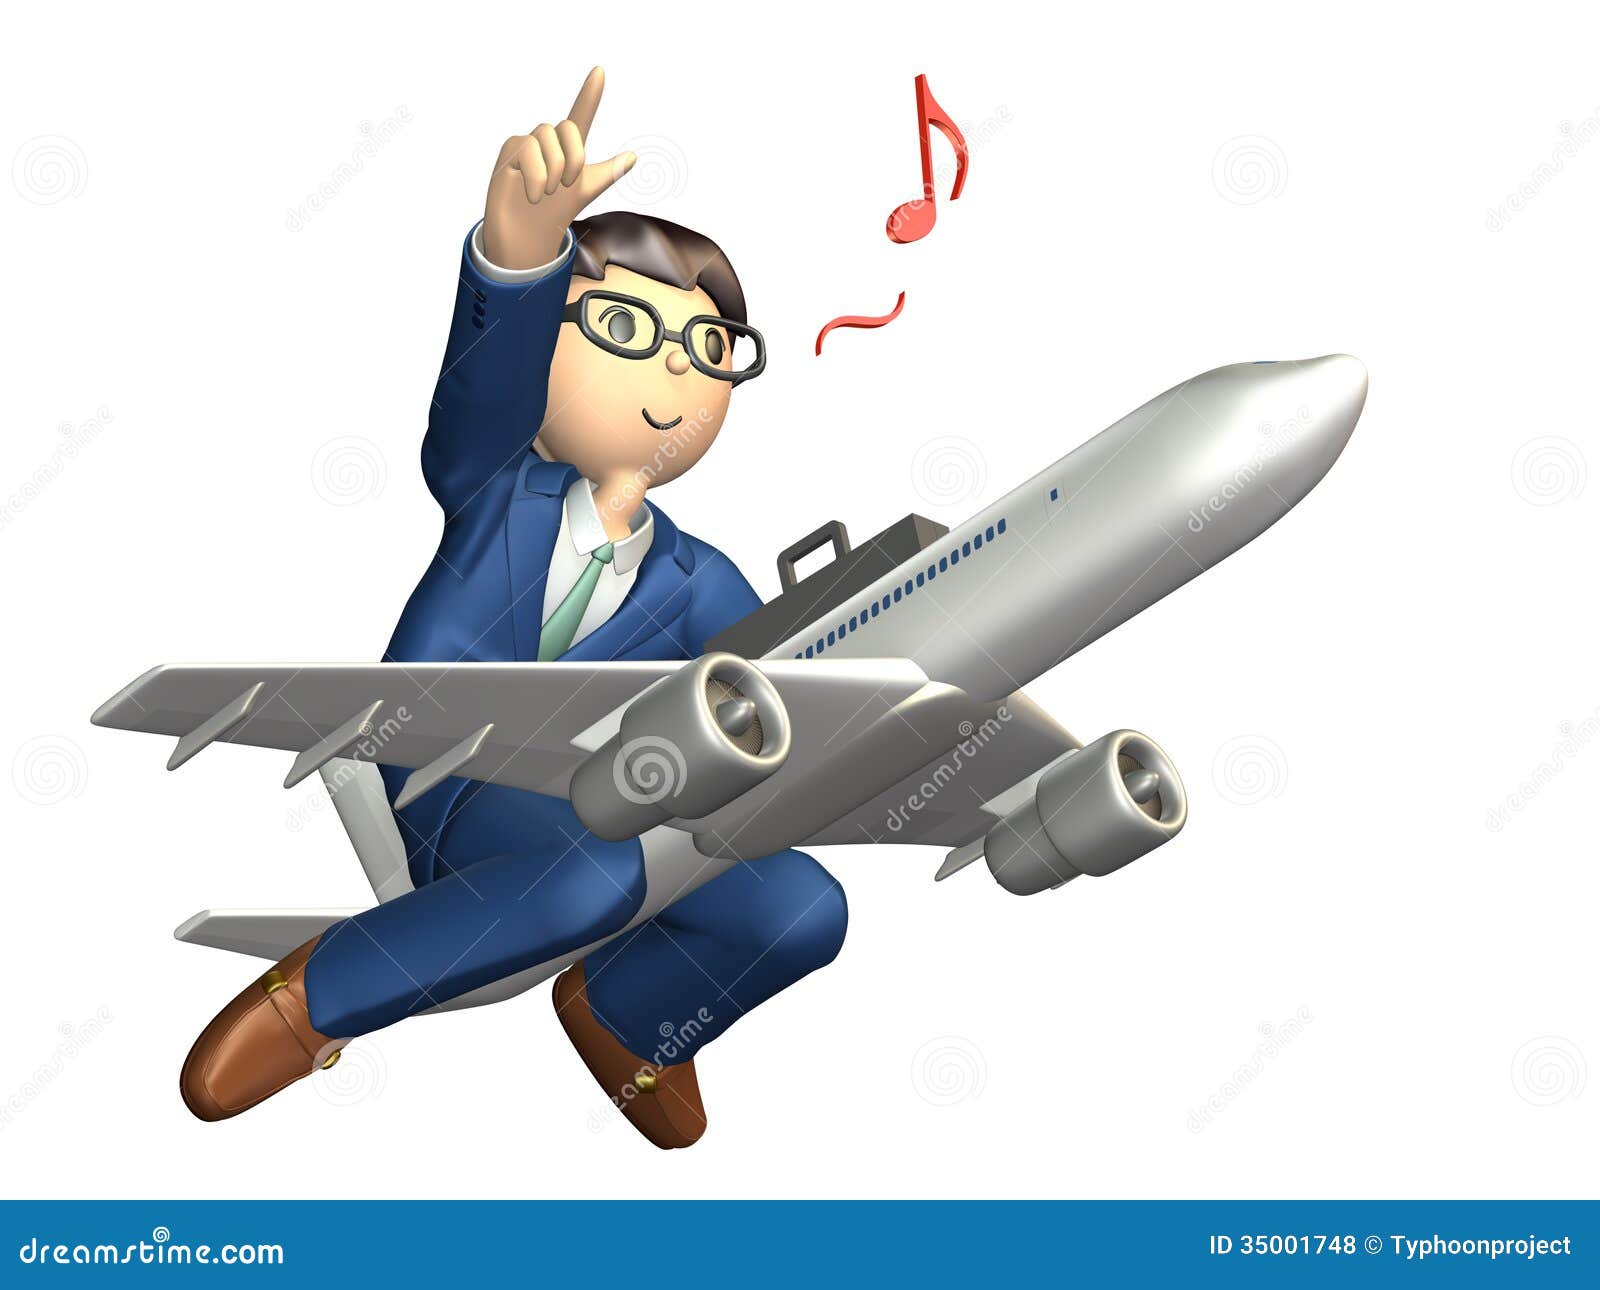 travel abroad clipart - photo #16